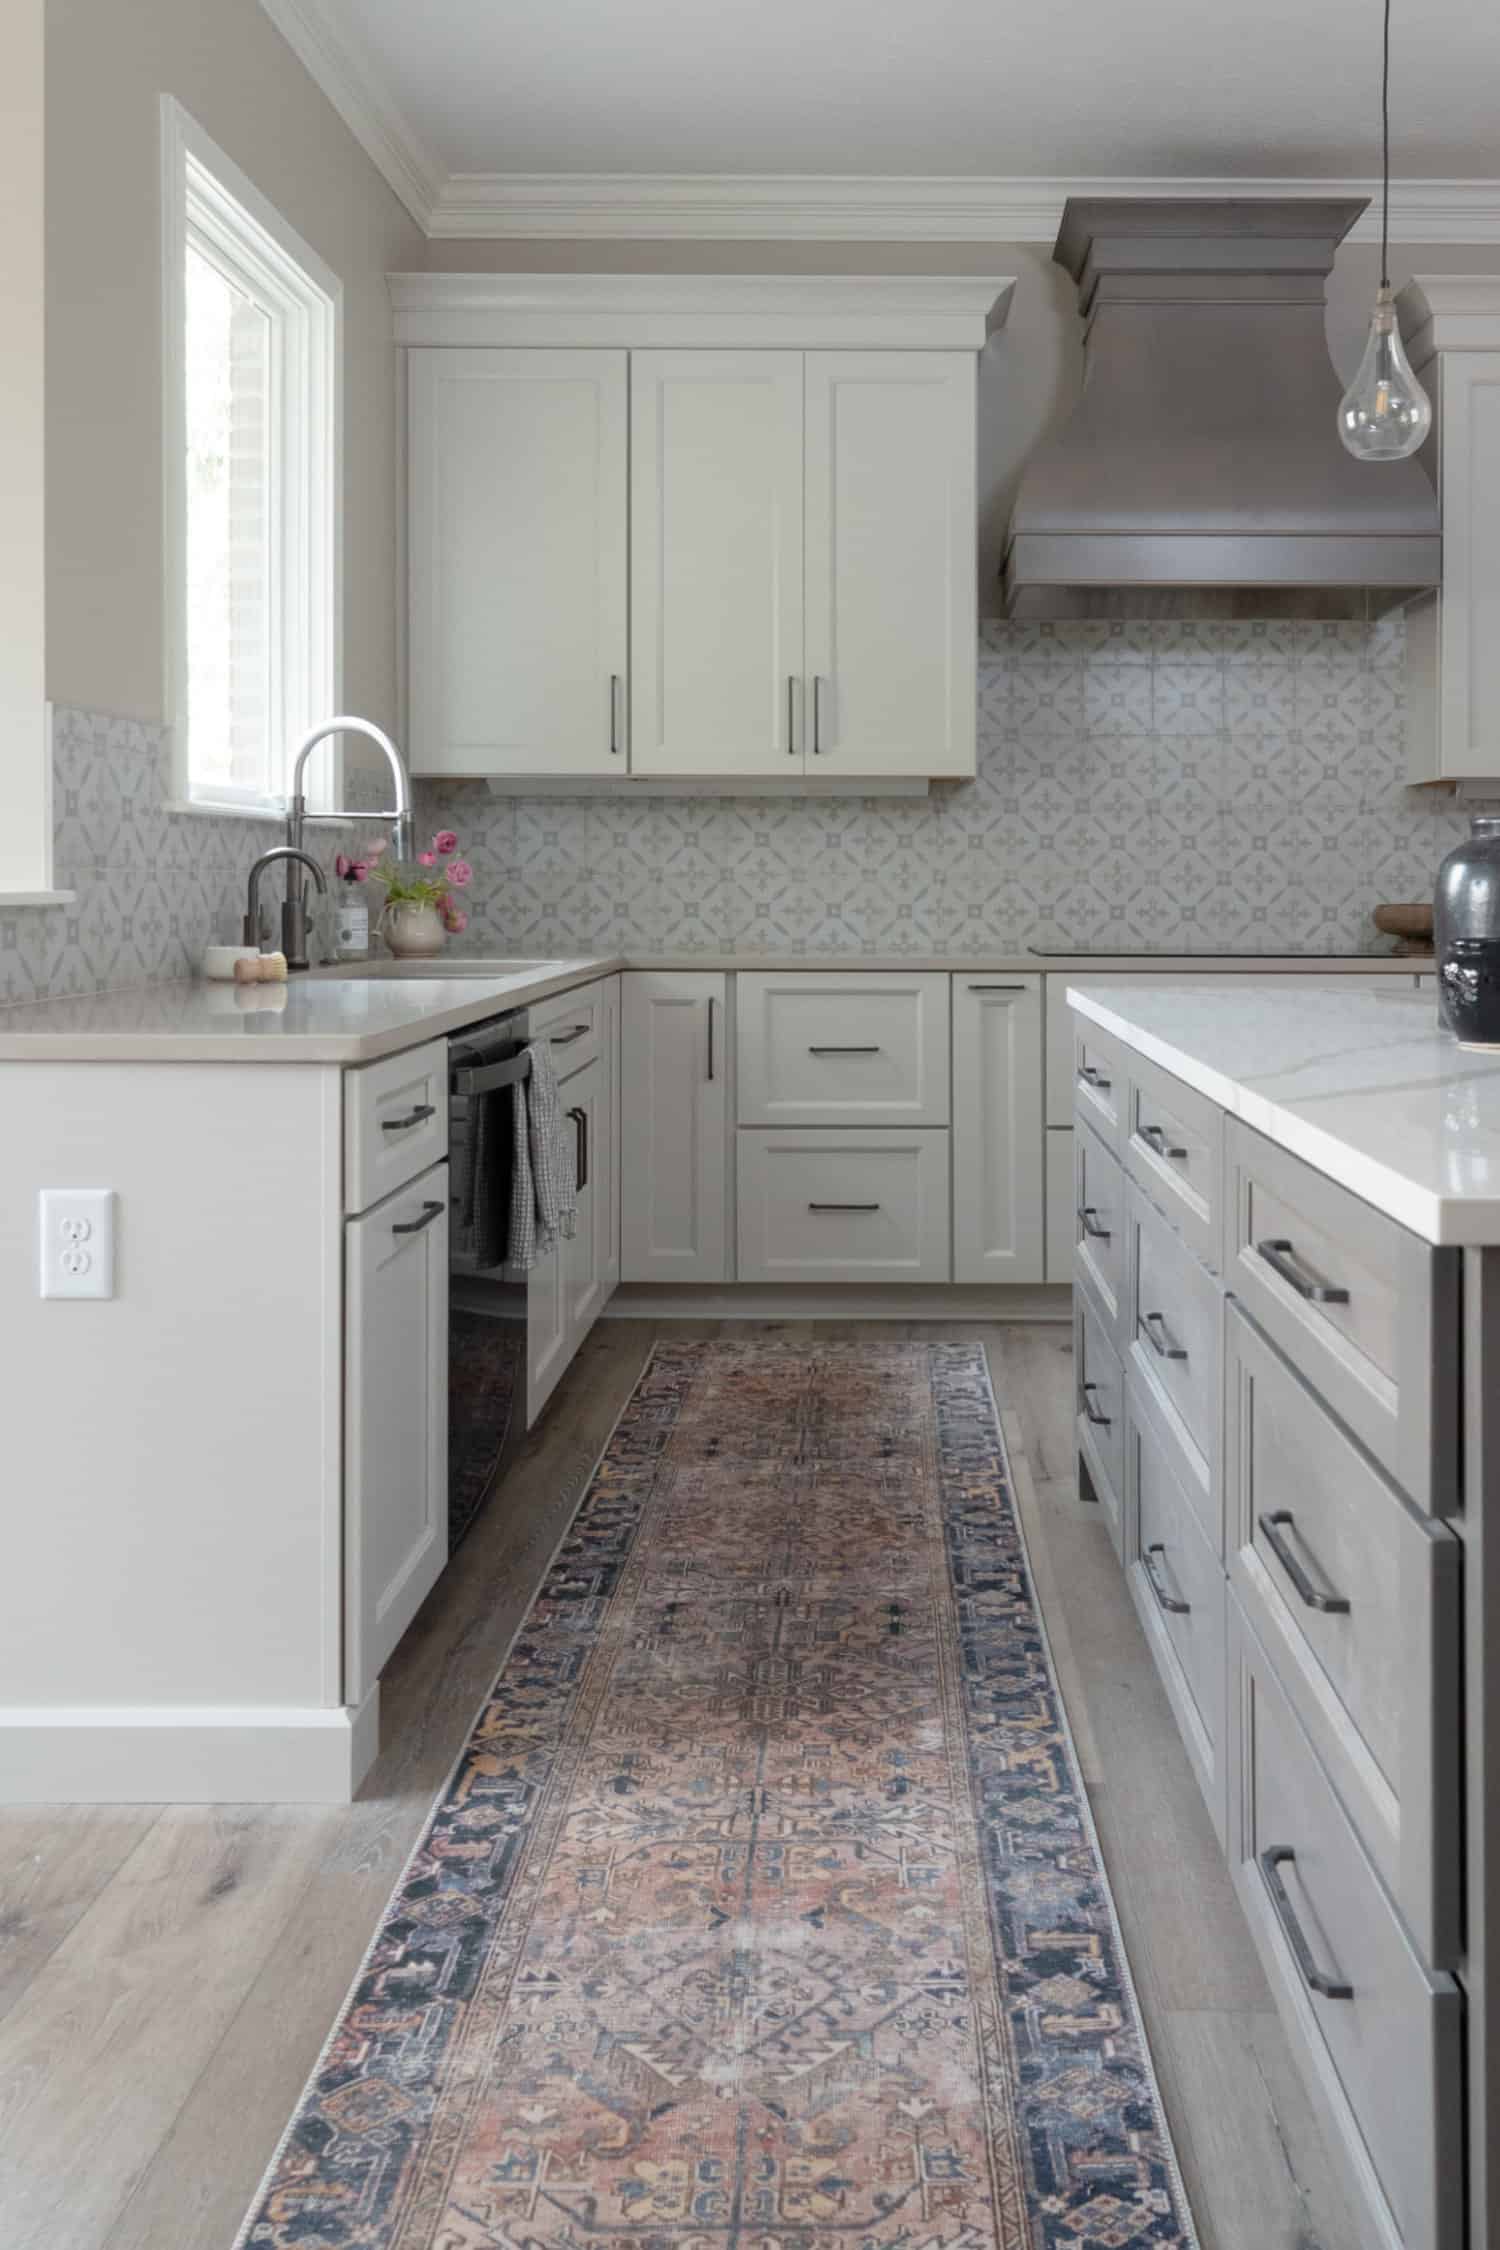 Nicholas Design Build | A kitchen remodel with gray cabinets and a rug on the floor.